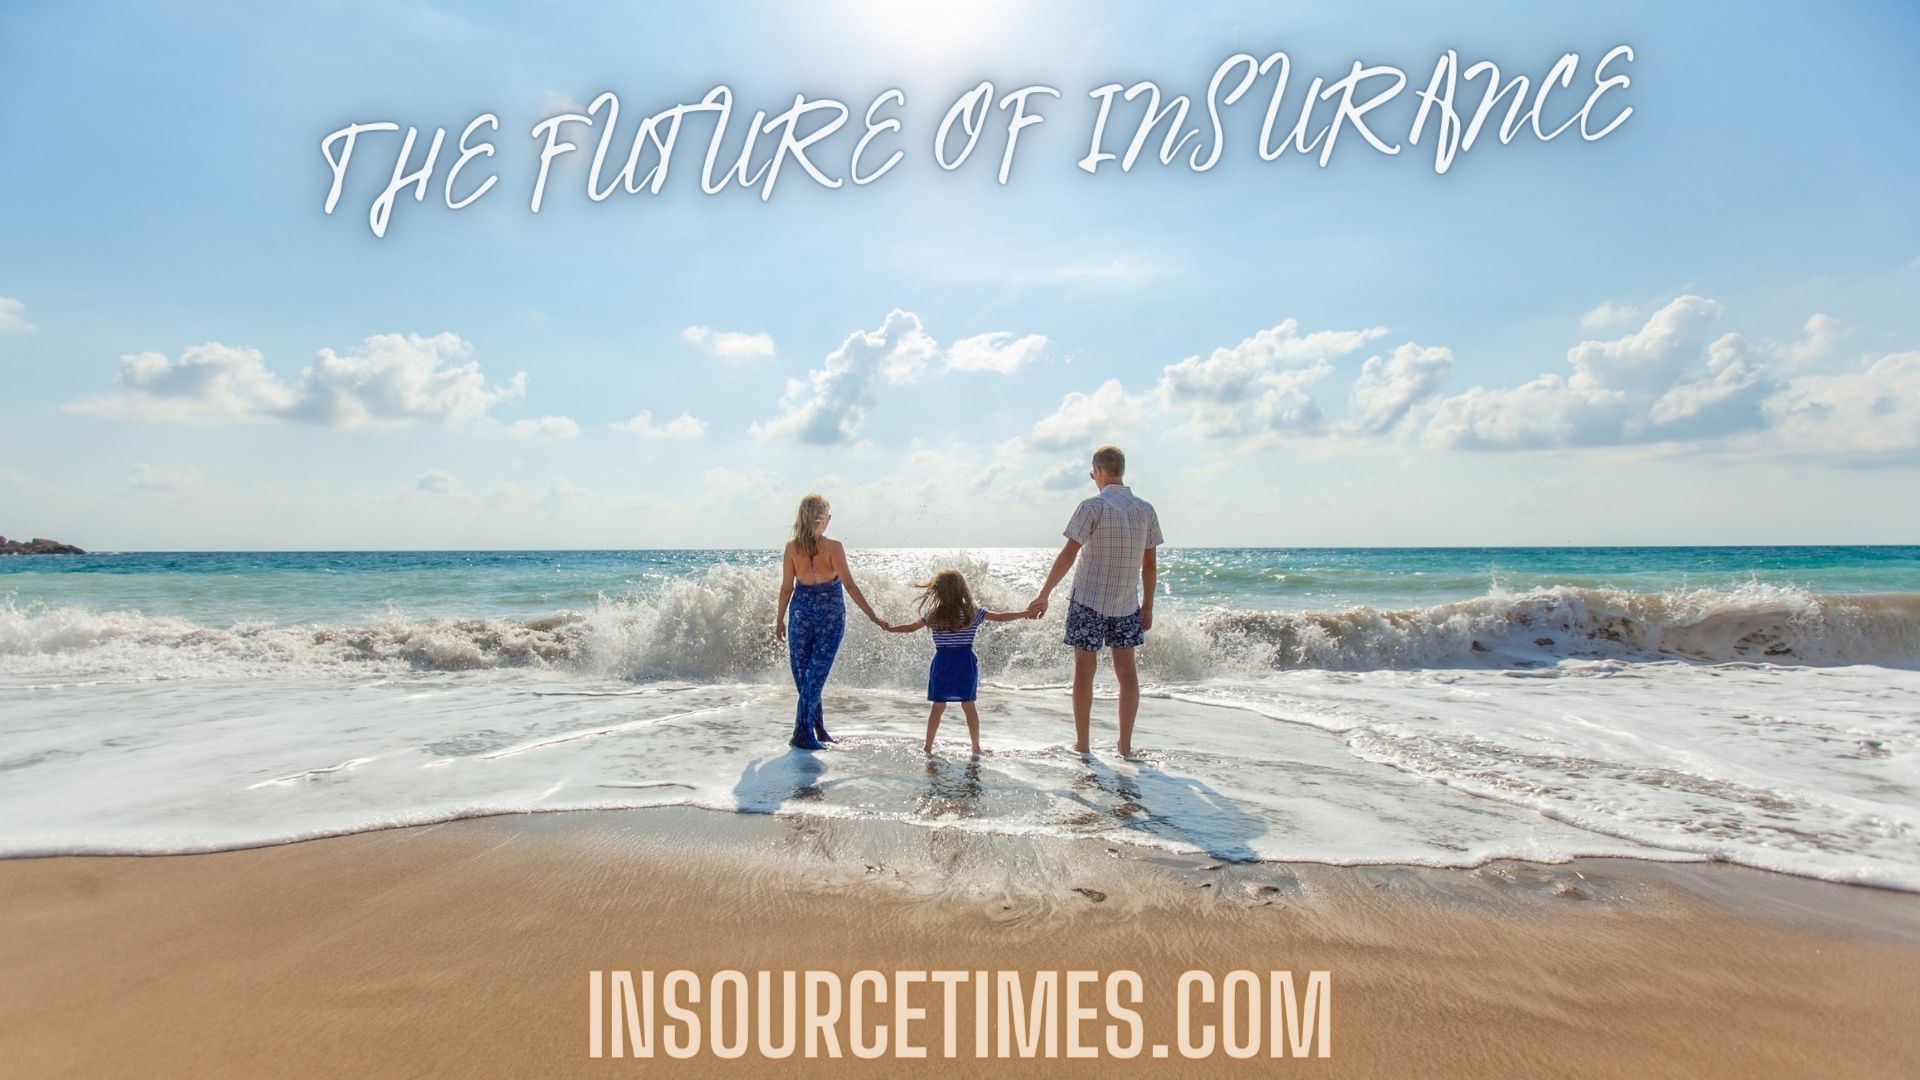 You are currently viewing The Future of Insurance 2022